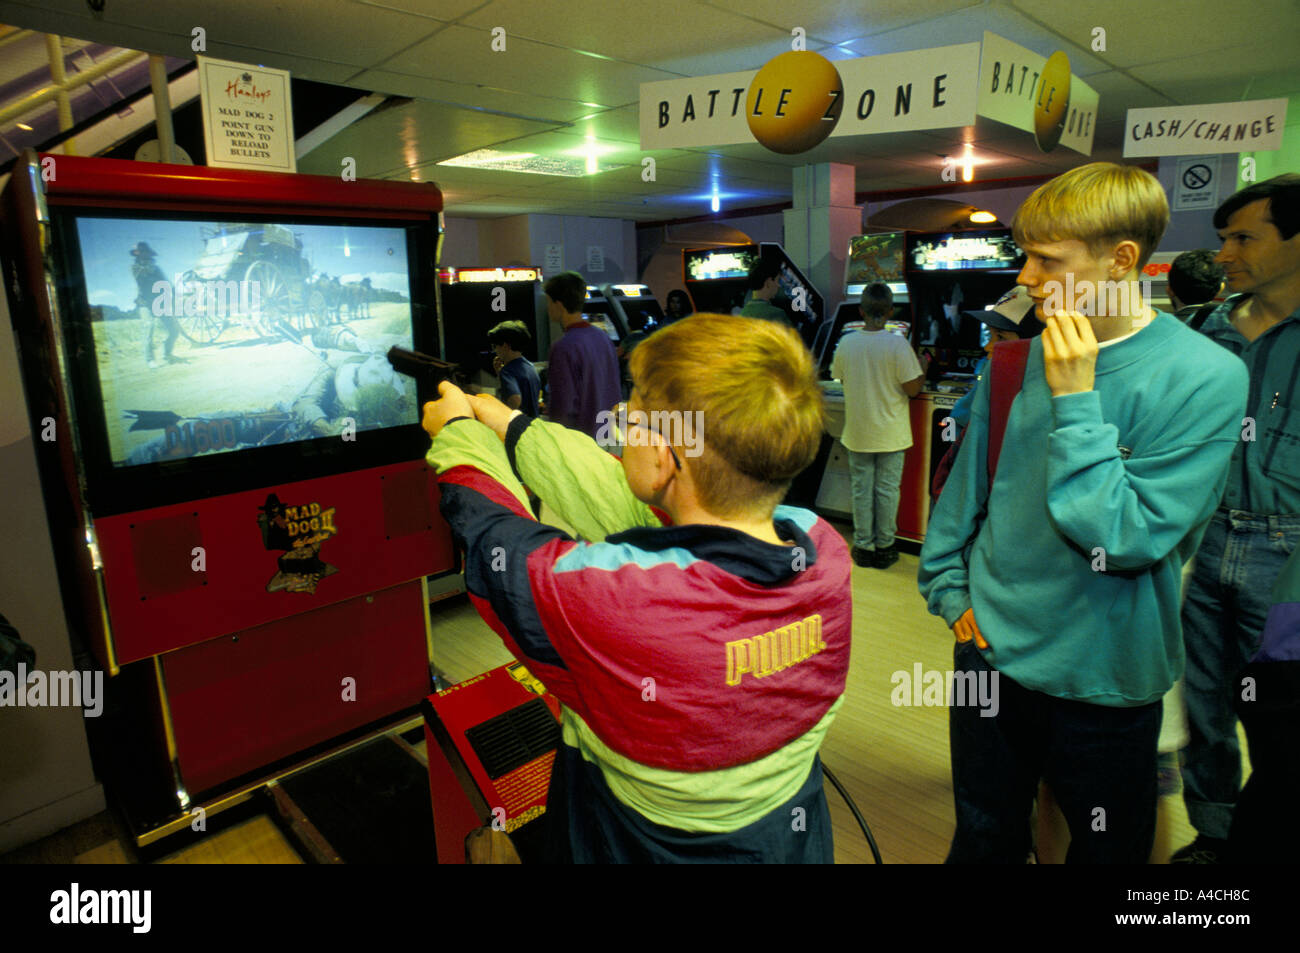 A teenage boy plays Mad Dogs 2, a virtual reality interactive shooting game at Hamleys toy shop, London England 08 93 Stock Photo